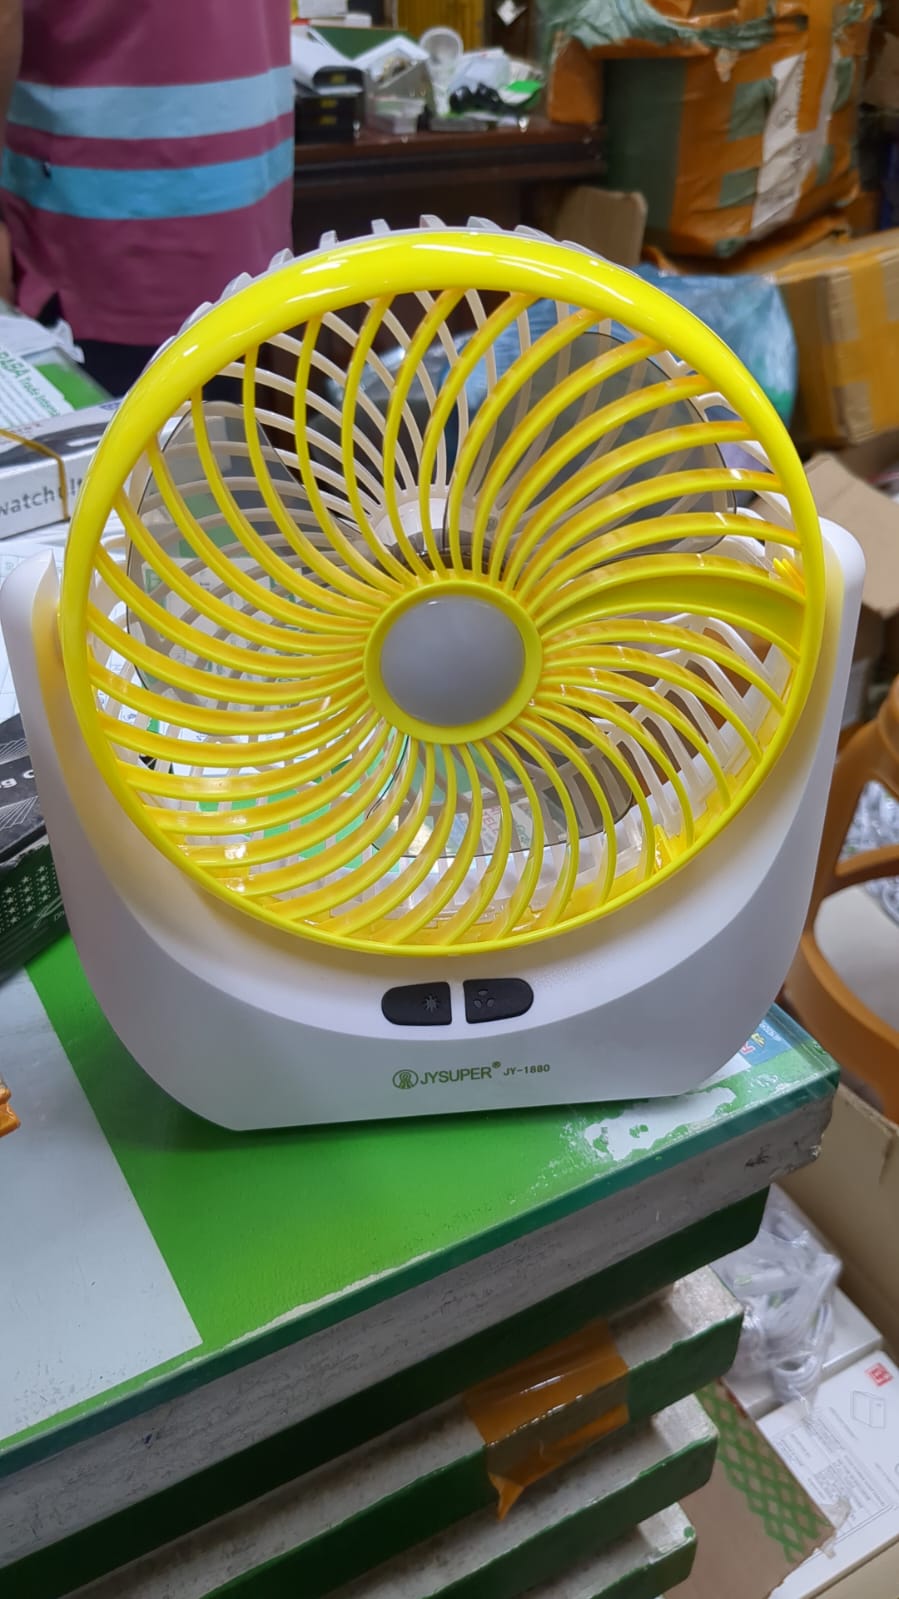 JY Super Lithium Rechargeable Mini Table Fan with LED Light - Portabl